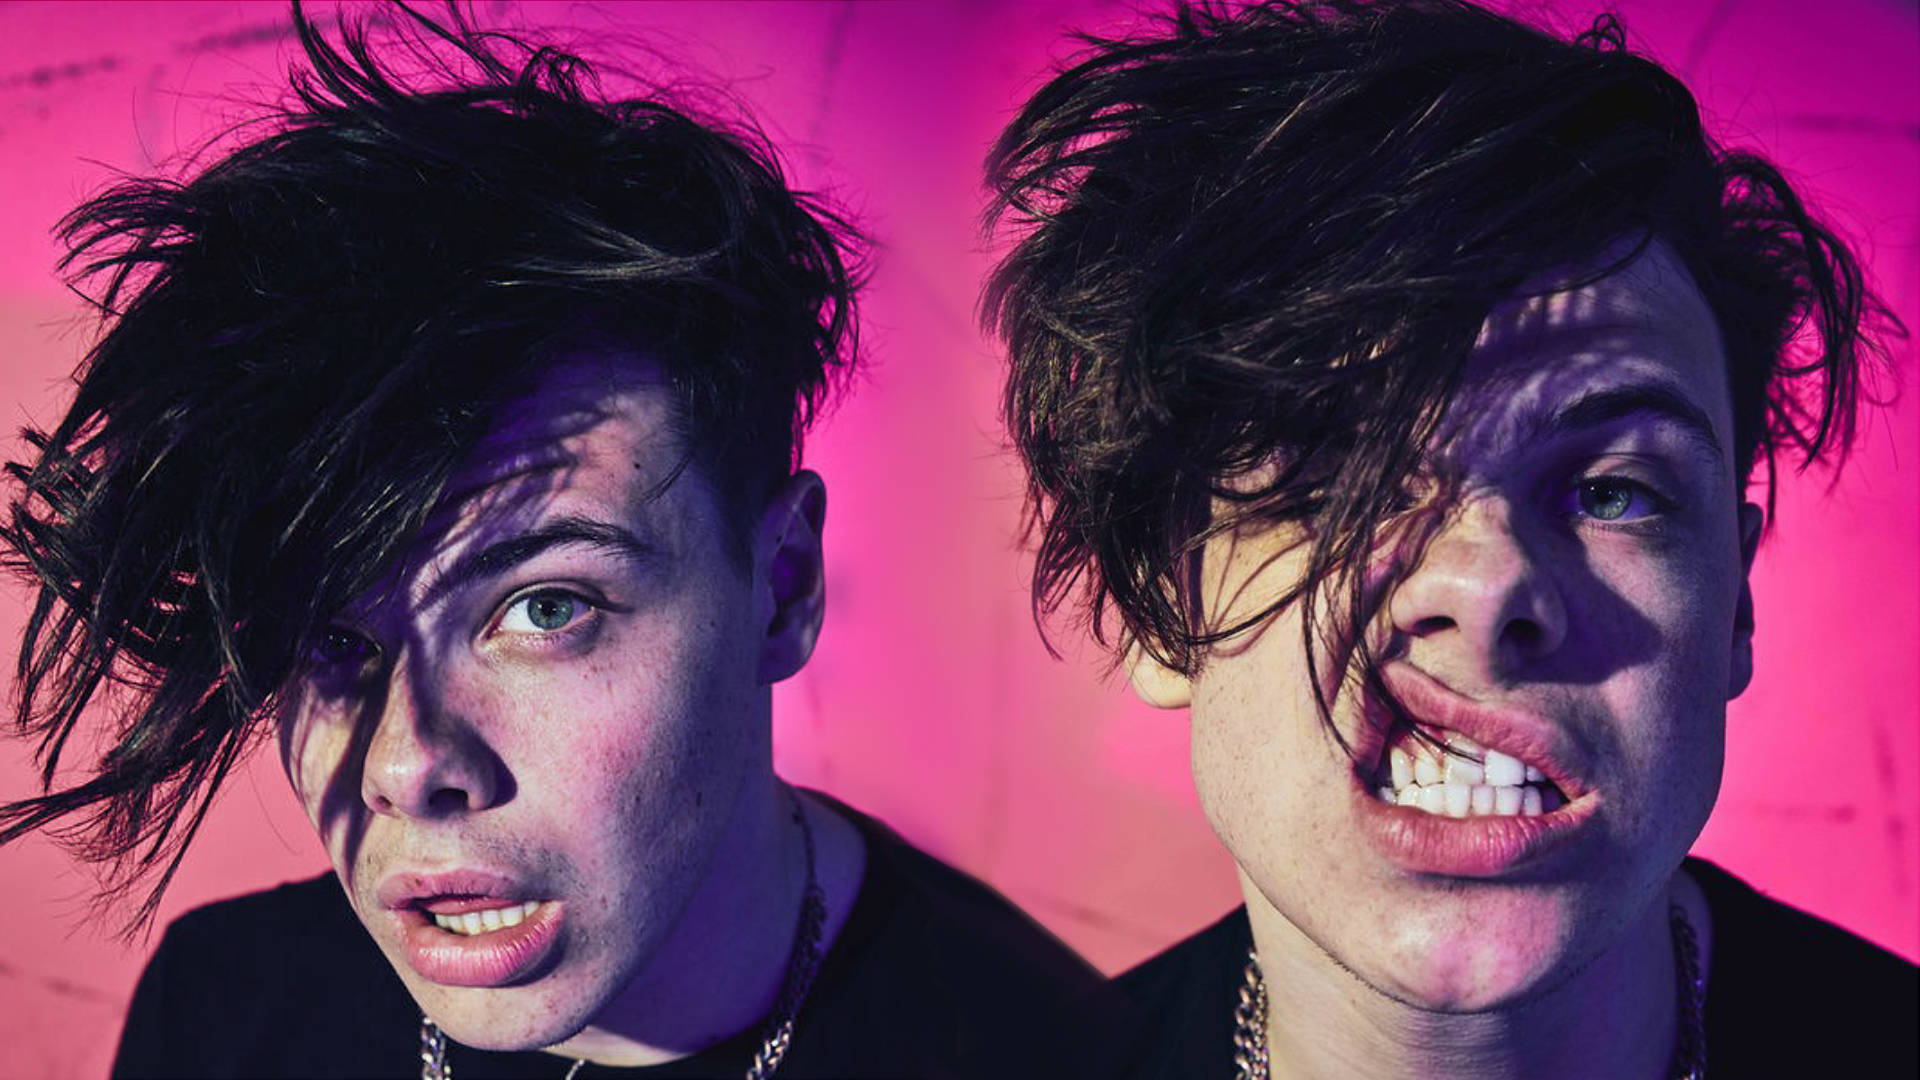 Yungblud is ready to take the music industry by storm. Wallpaper